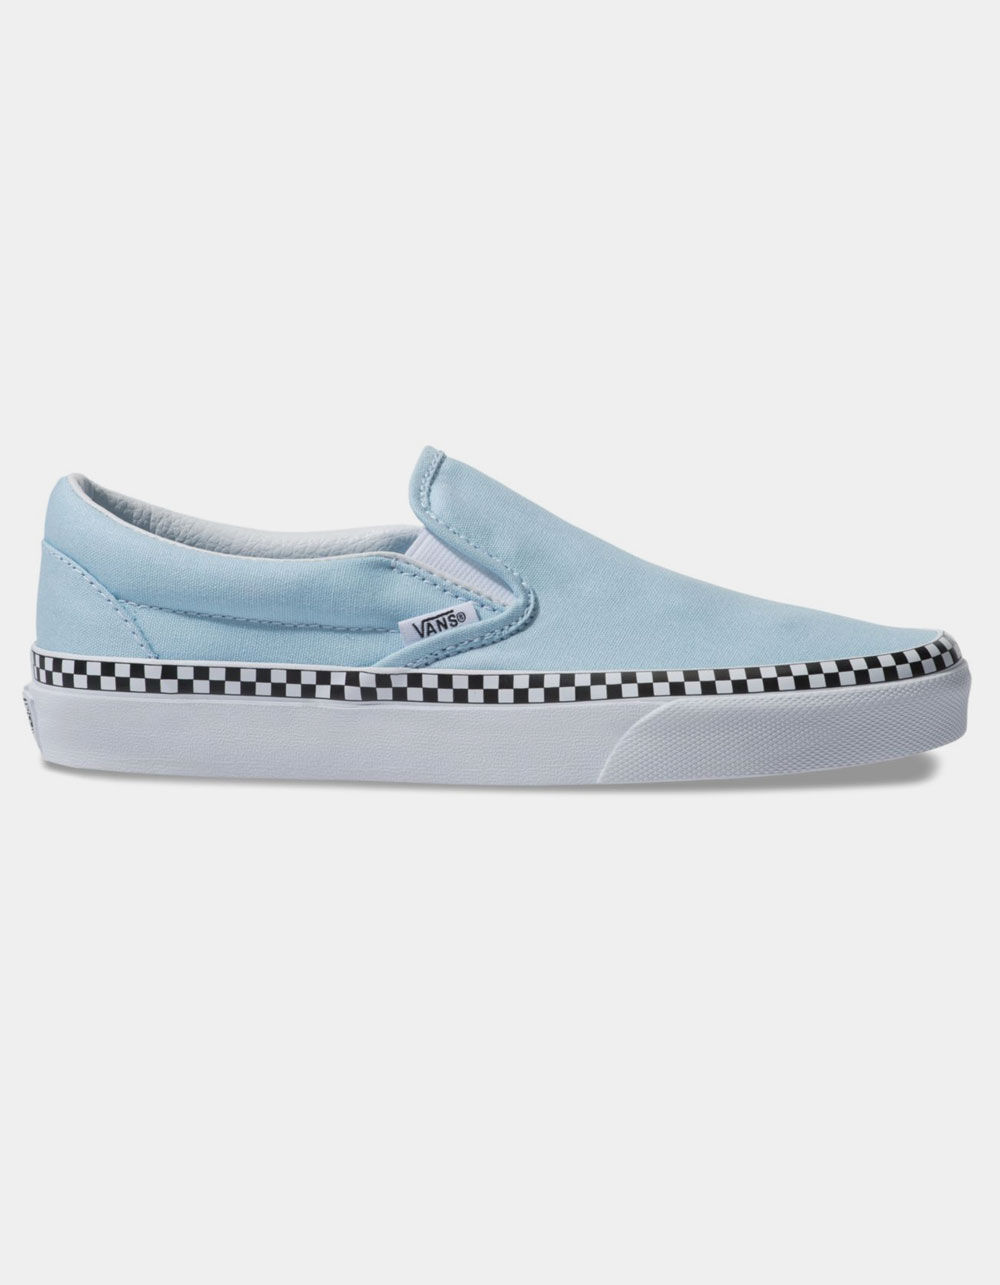 VANS Check Foxing Classic Cool Blue & True White Womens Shoes - COOL BLUE/TRUE WHITE | Tillys